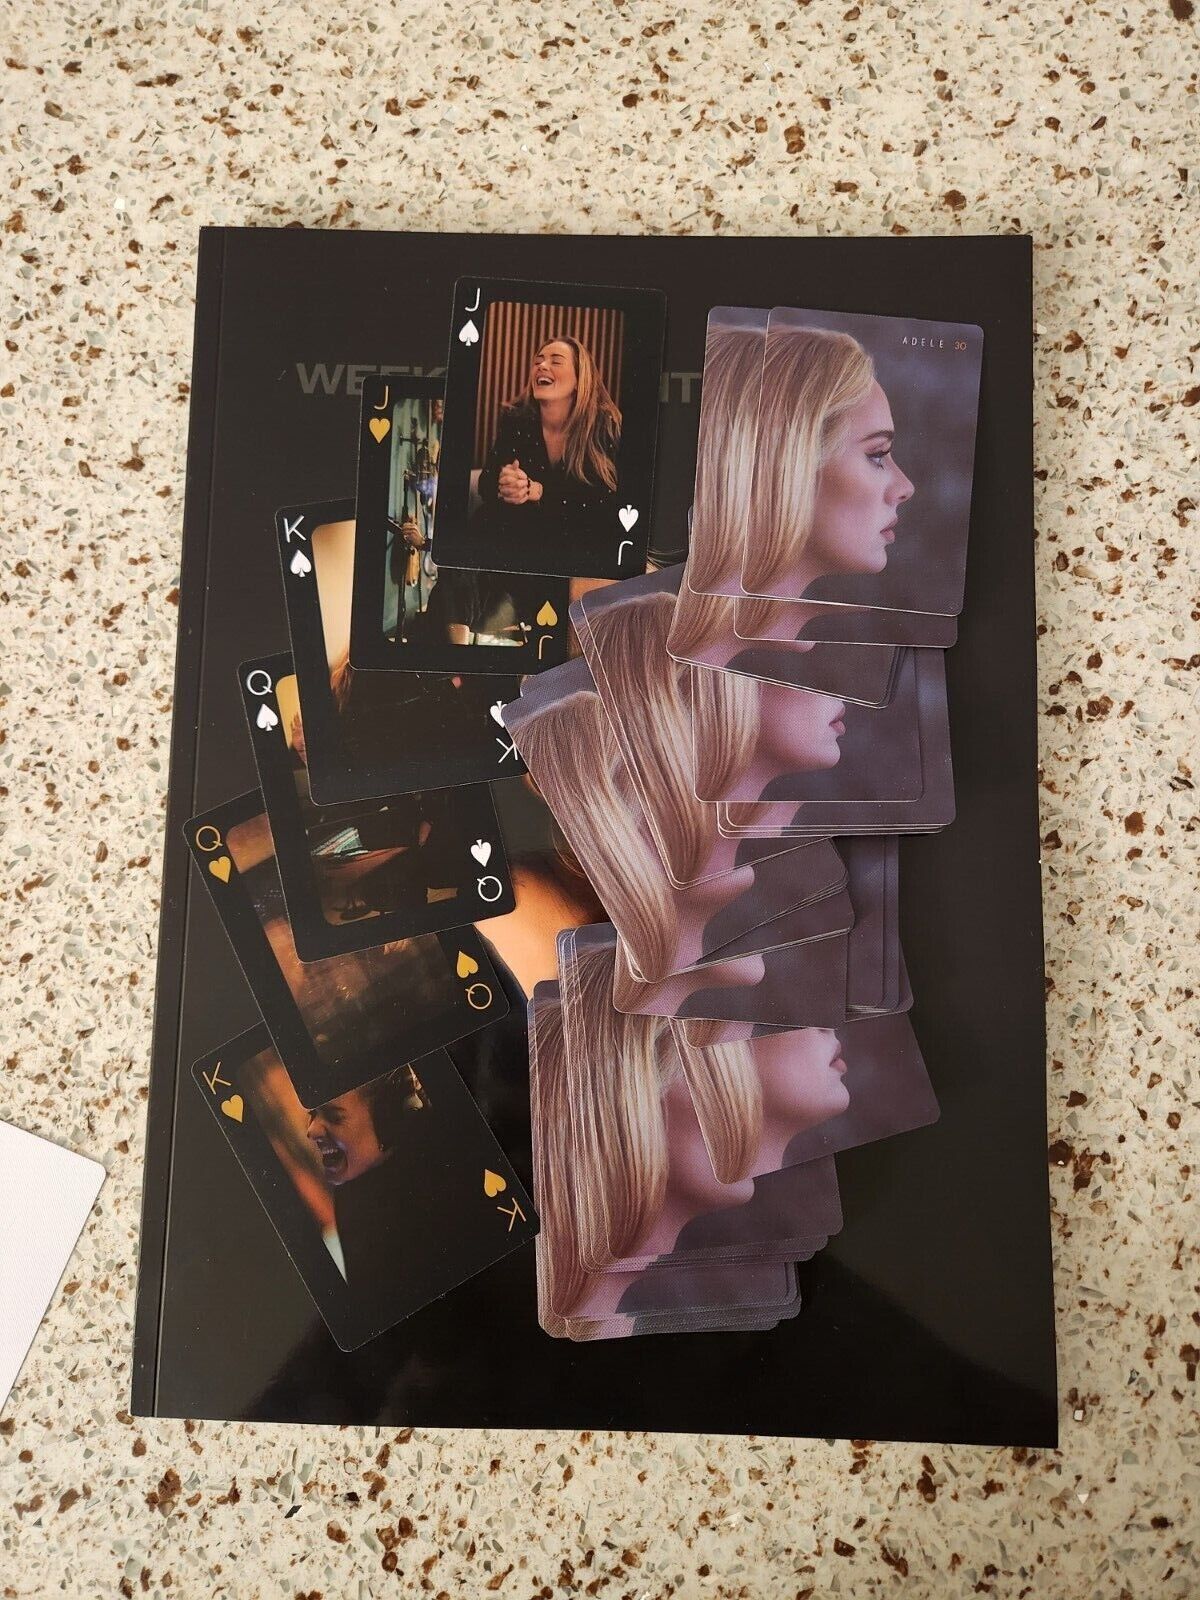 Adele “Weekends With Adele” Residency Playing Cards (52) Photos Vegas Boutique